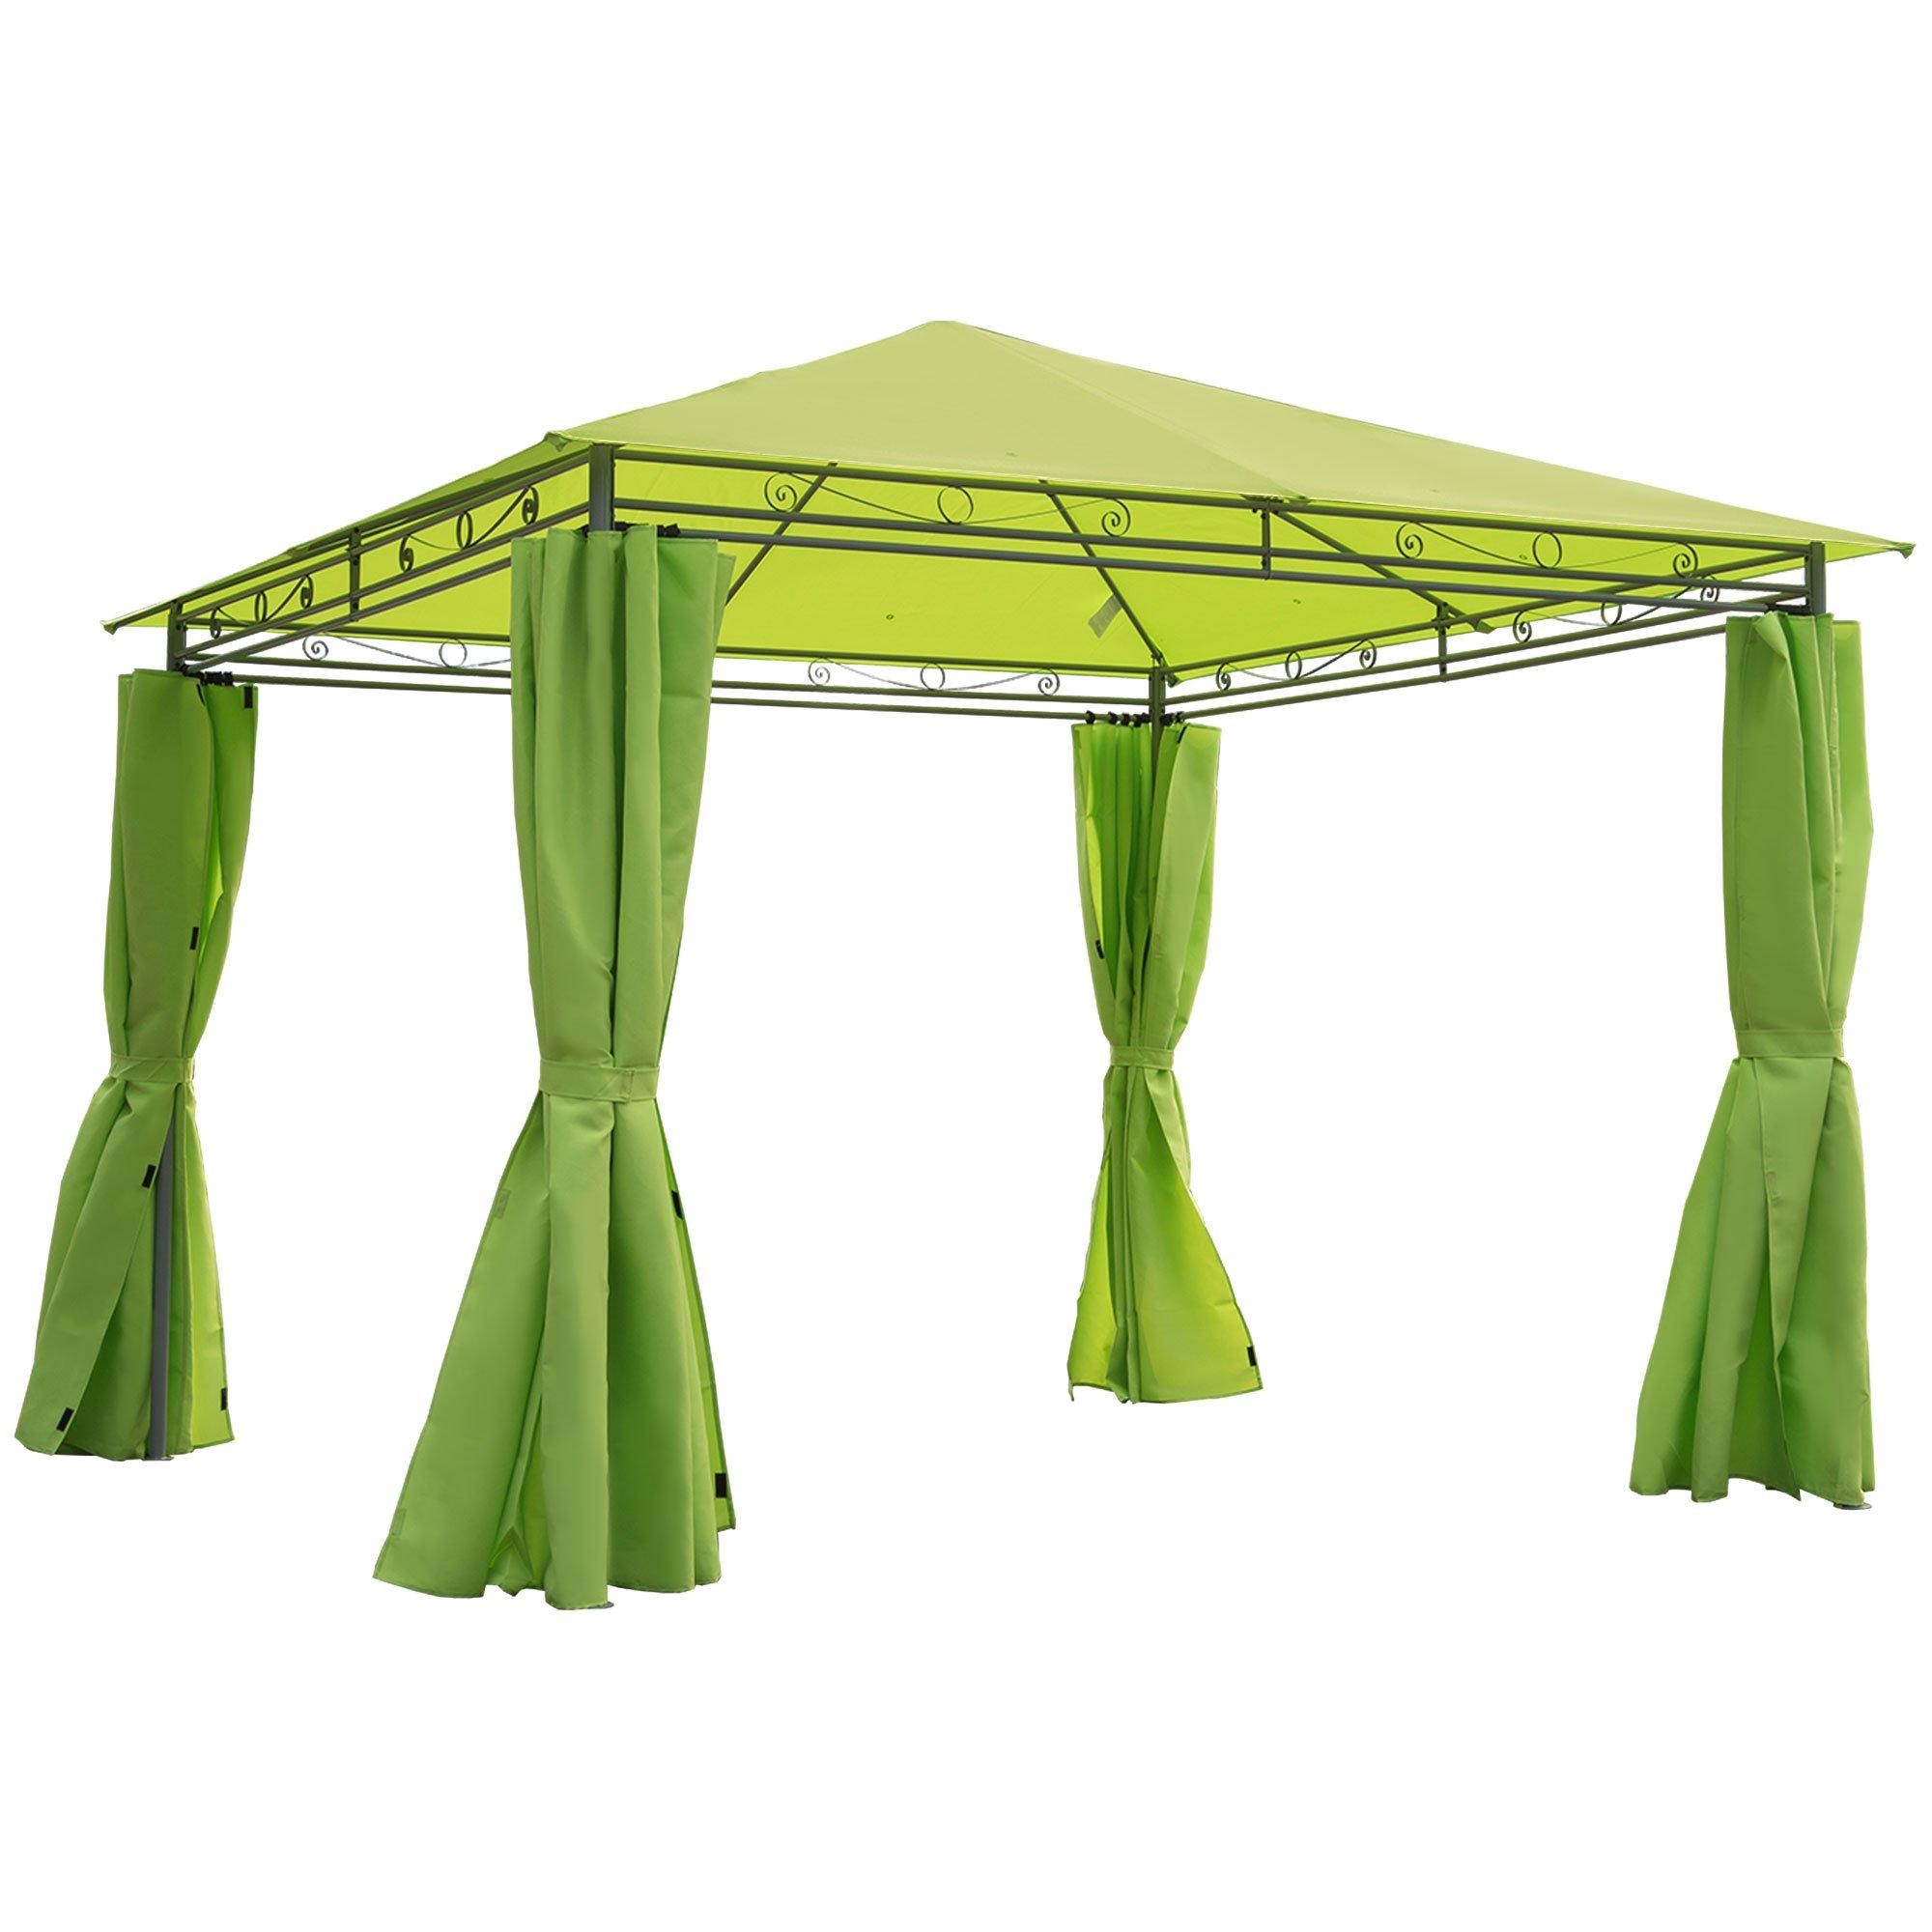 3x3m Garden Metal Gazebo Marquee Patio Party Tent Canopy Shelter